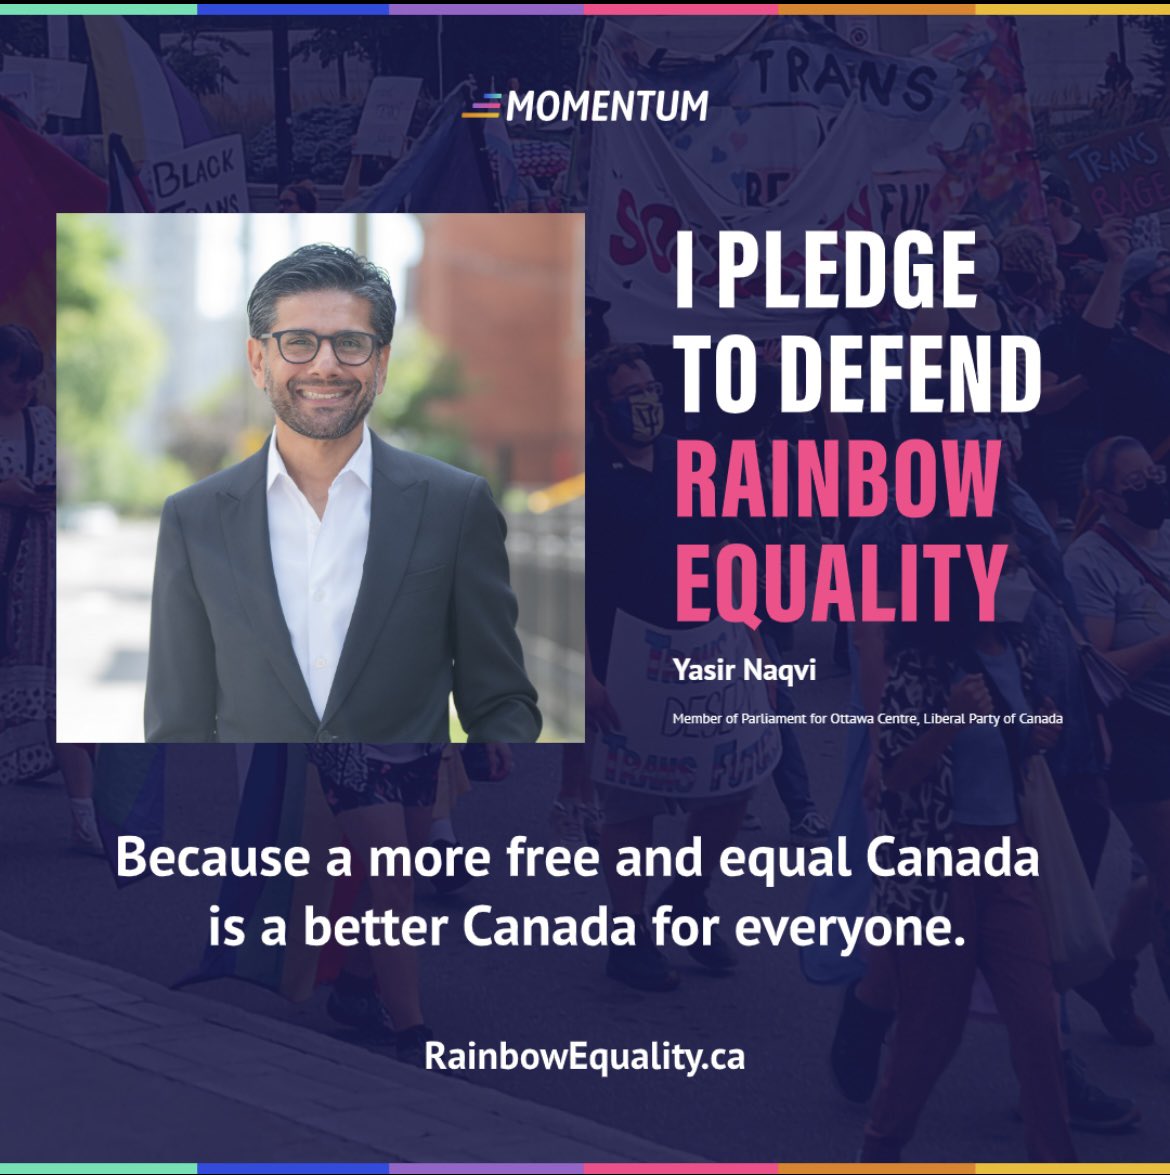 I am happy to support Queer Momentum’s pledge to defend #RainbowEquality. As a Member of Parliament, I am committed to defending the rights of 2SLGBTQIA+ people and making Canada a more inclusive and welcoming place for all. 🏳️‍🌈🏳️‍⚧️🇨🇦